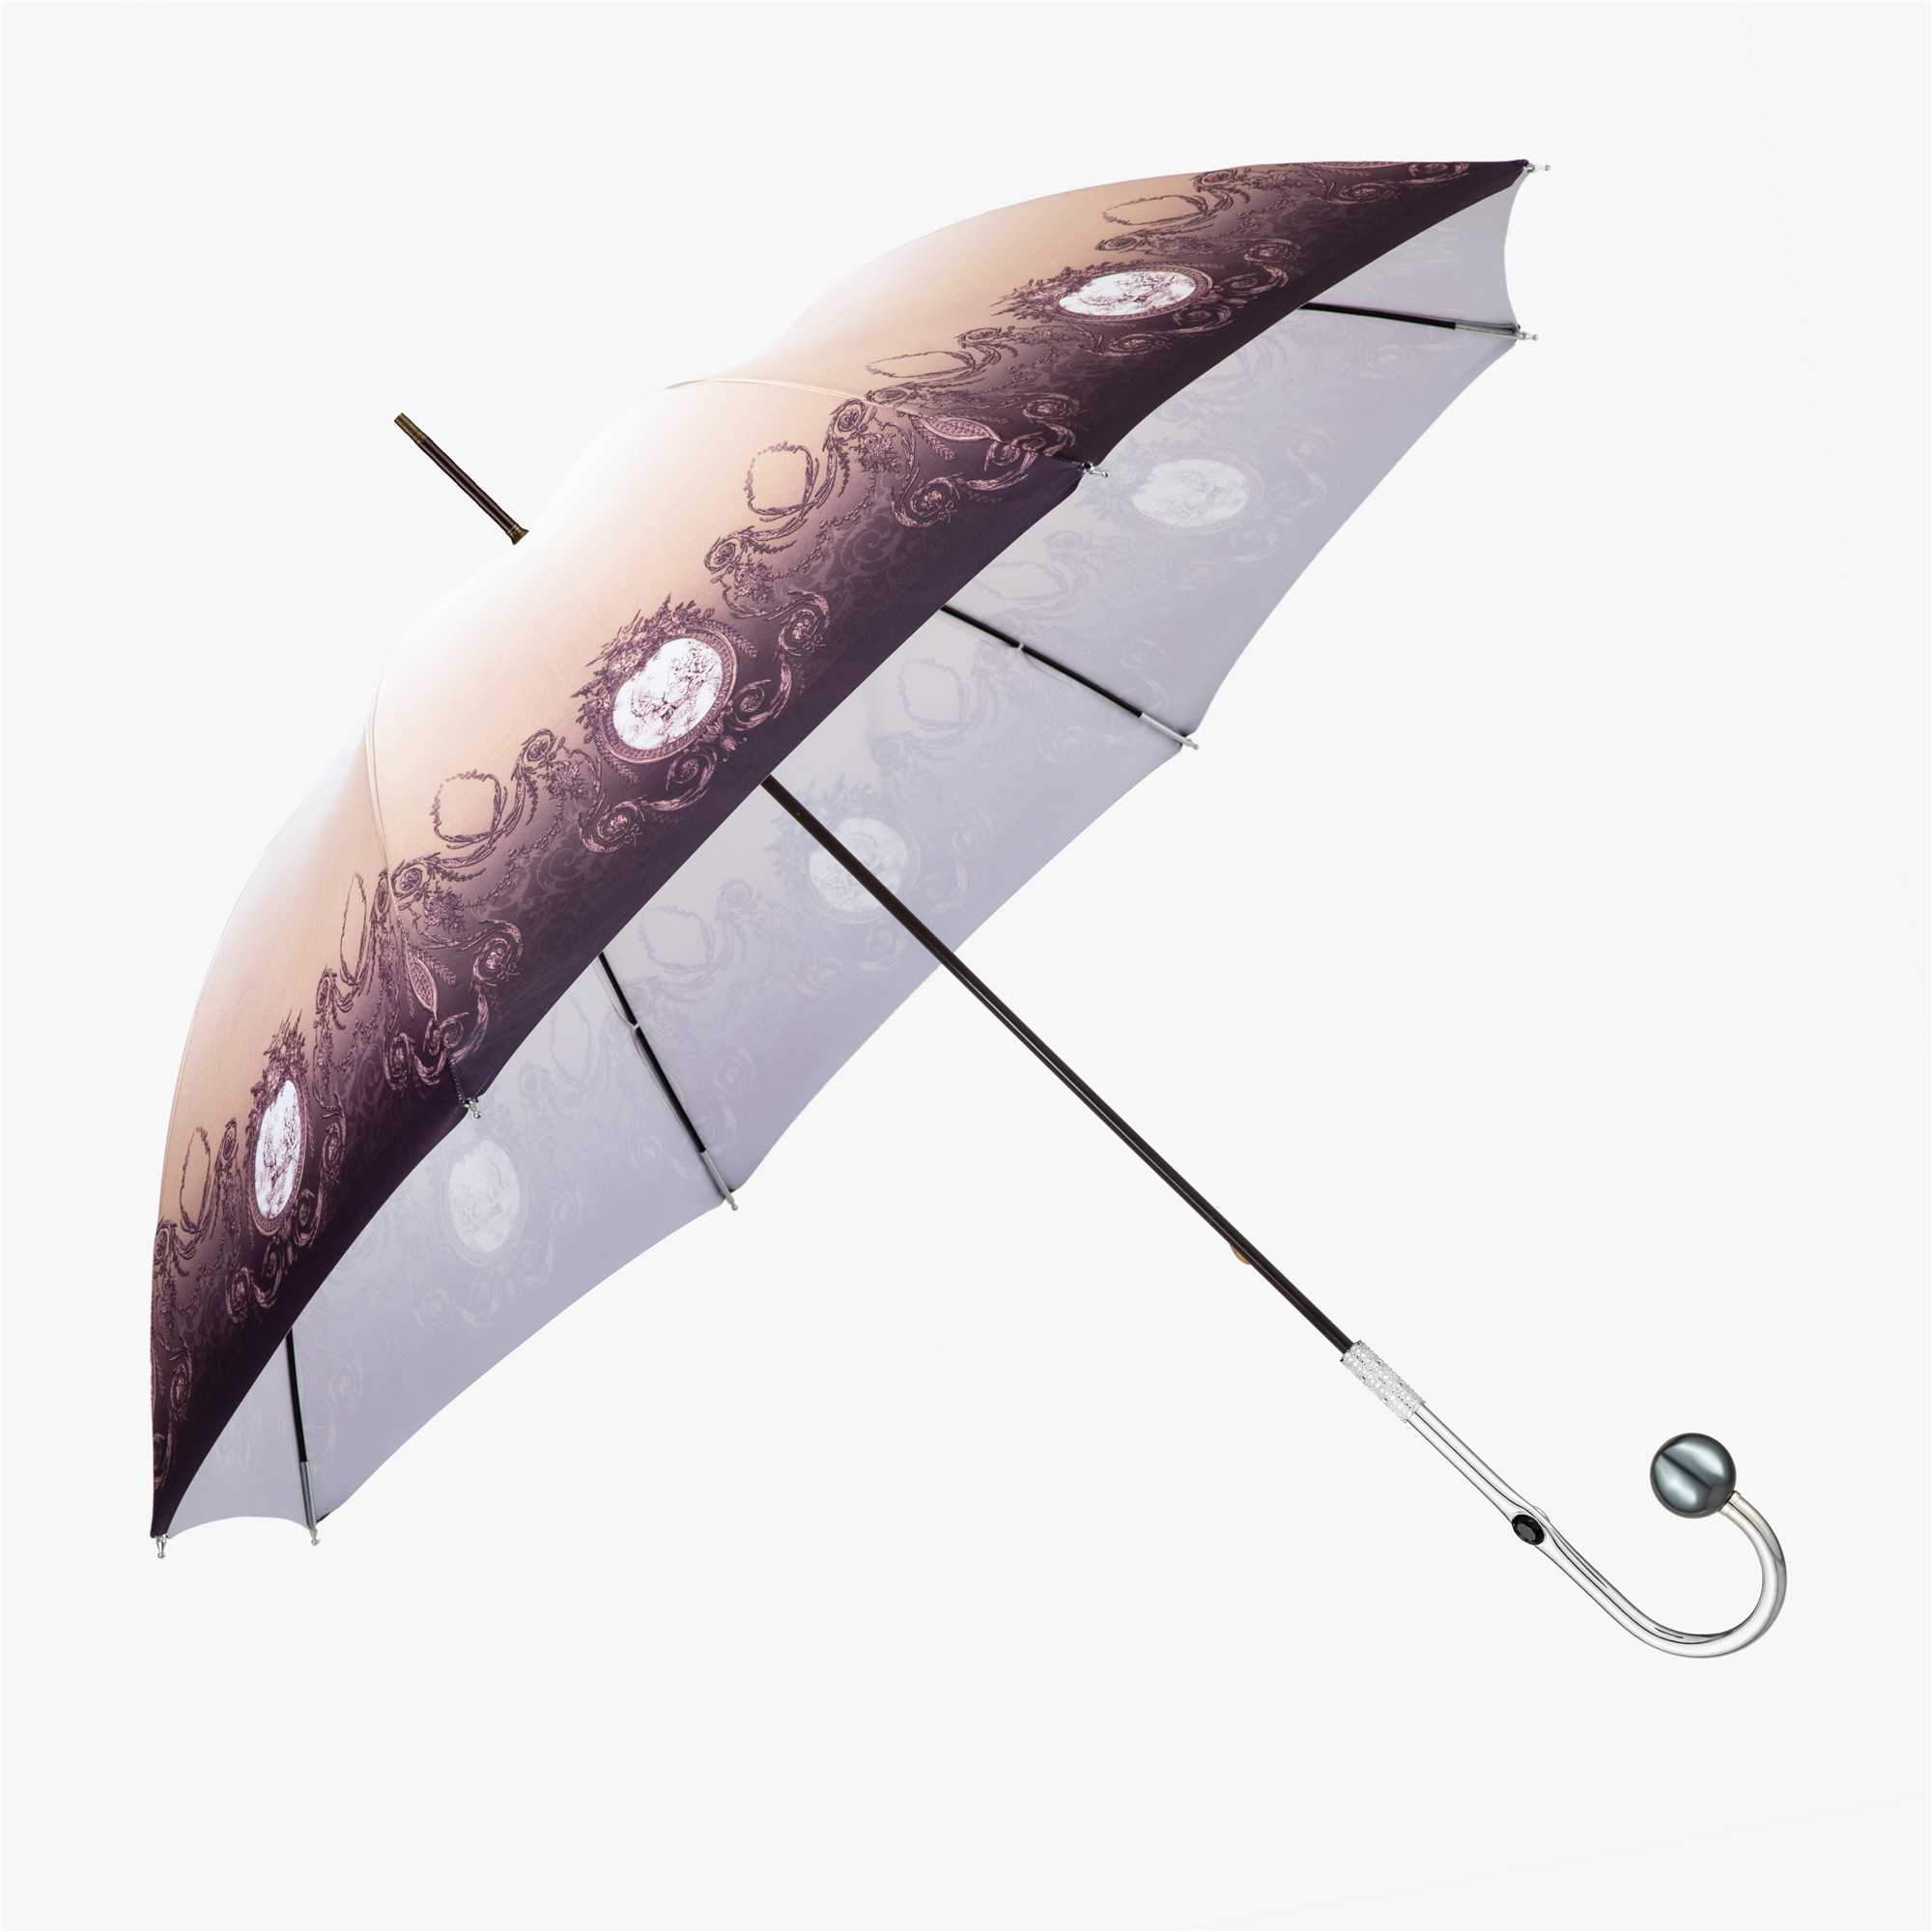 Black pearl umbrella with curved handle